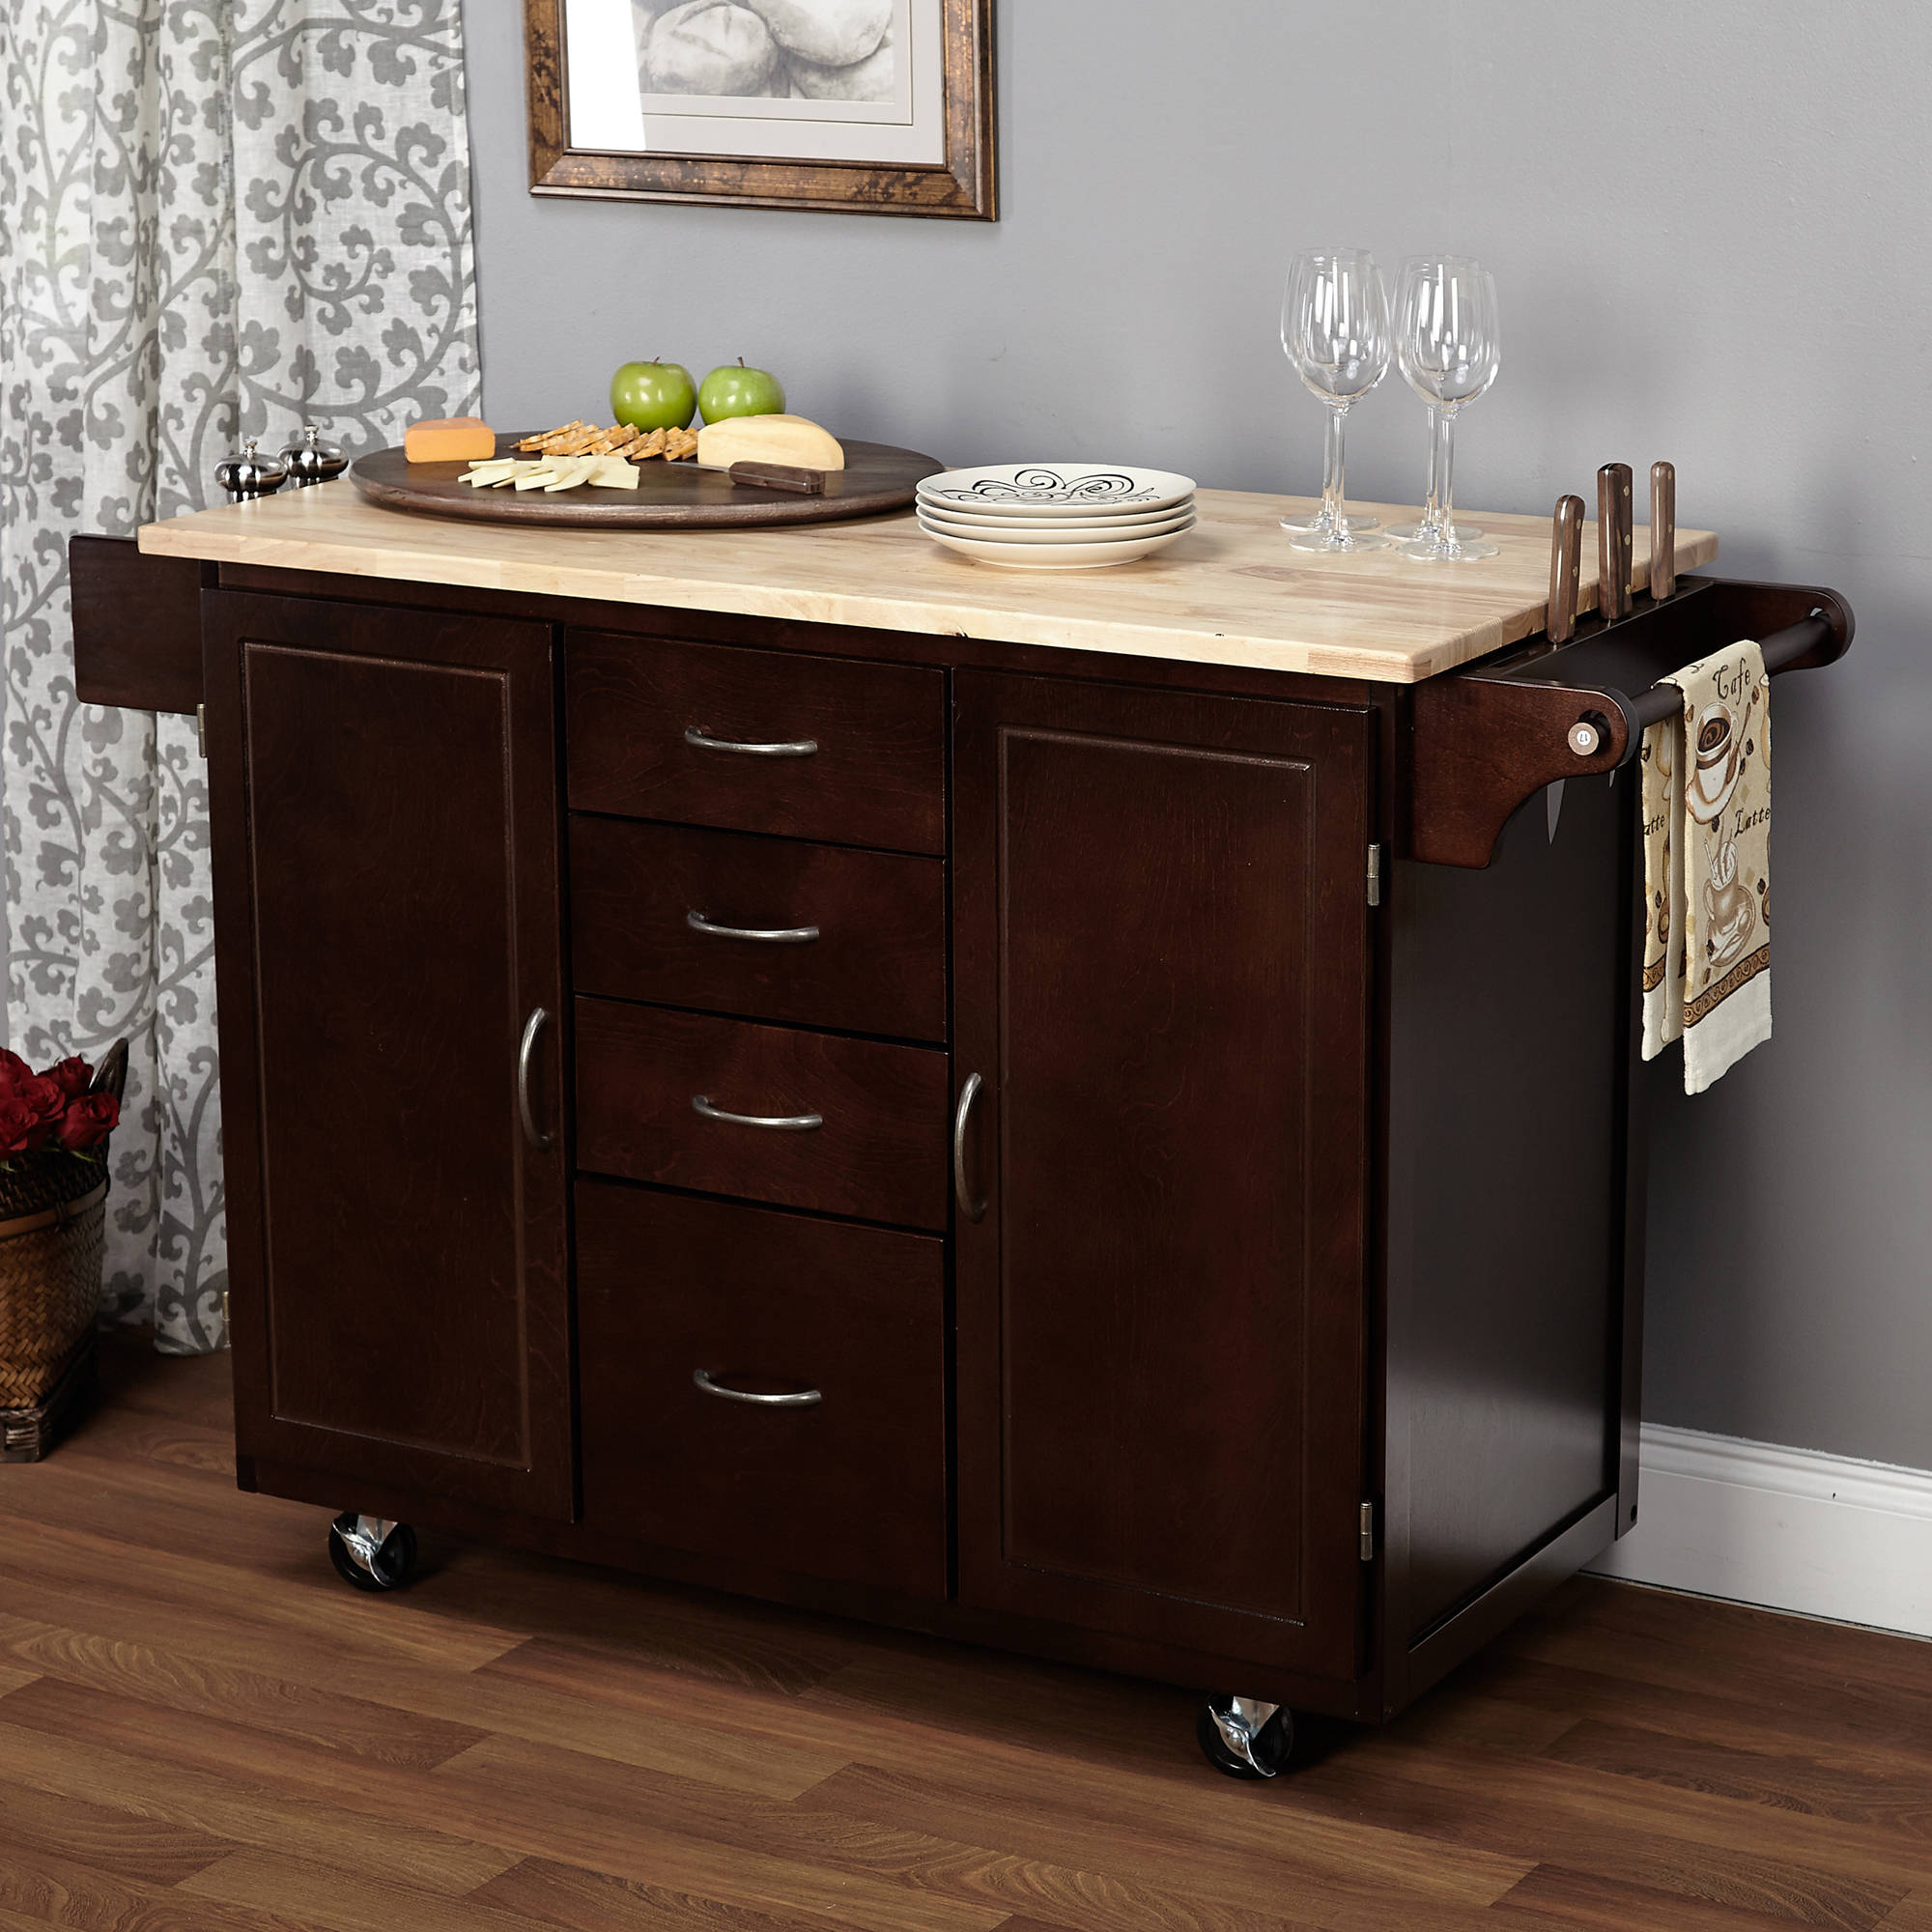 eHemco Kitchen Island Cart Natural Butcher Block Bamboo Top with White Base  - Traveller Location